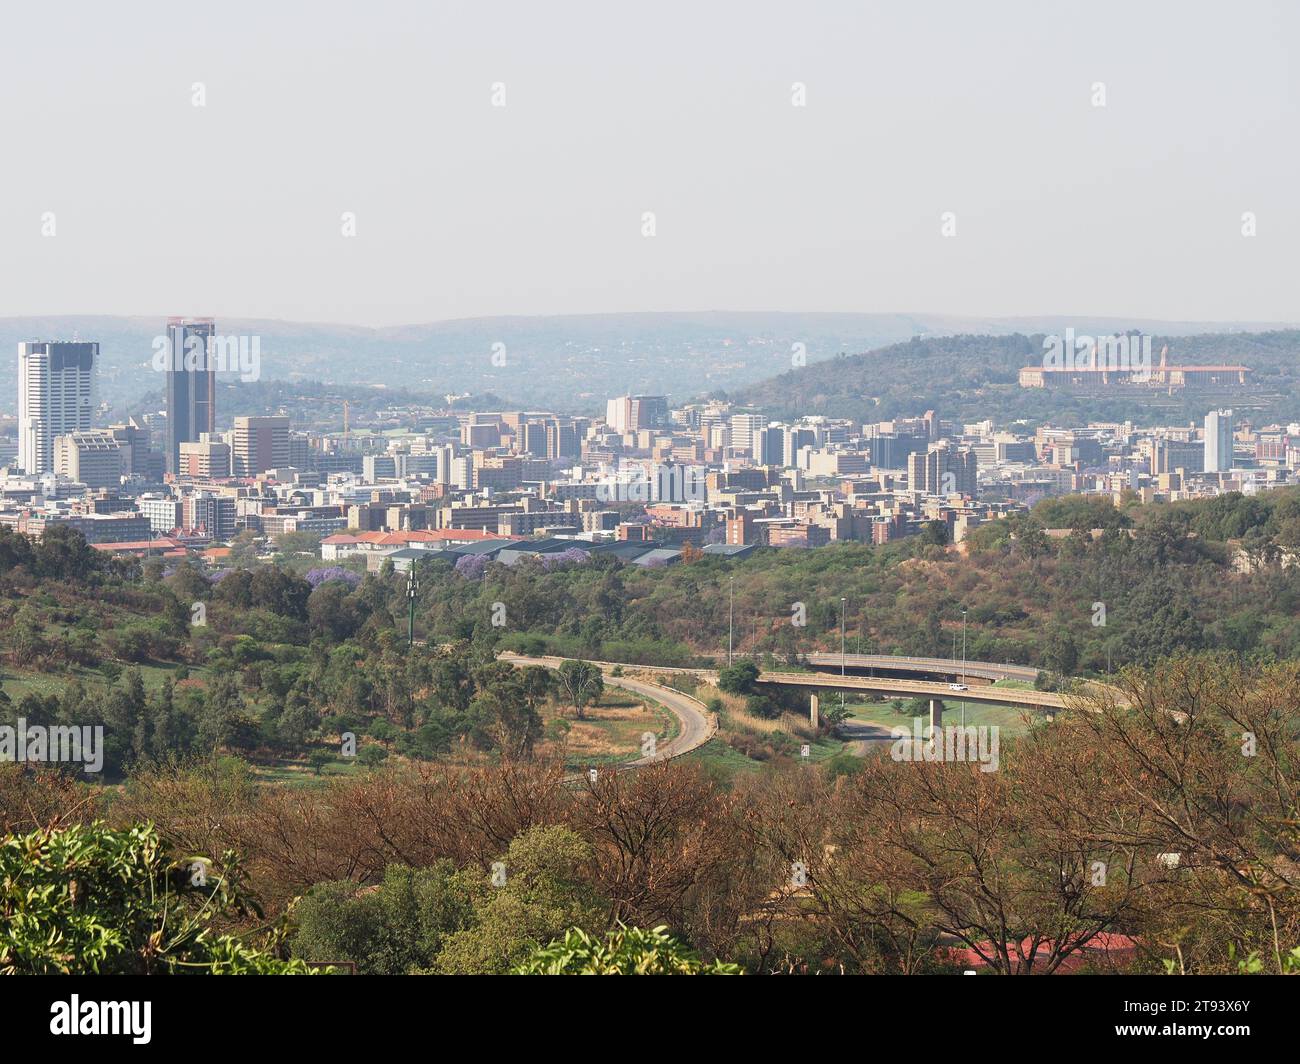 The city of Pretoria, the administrative capital, seen from a distance with highways and nature in the foreground. Pretoria, Gauteng, South Africa. Stock Photo